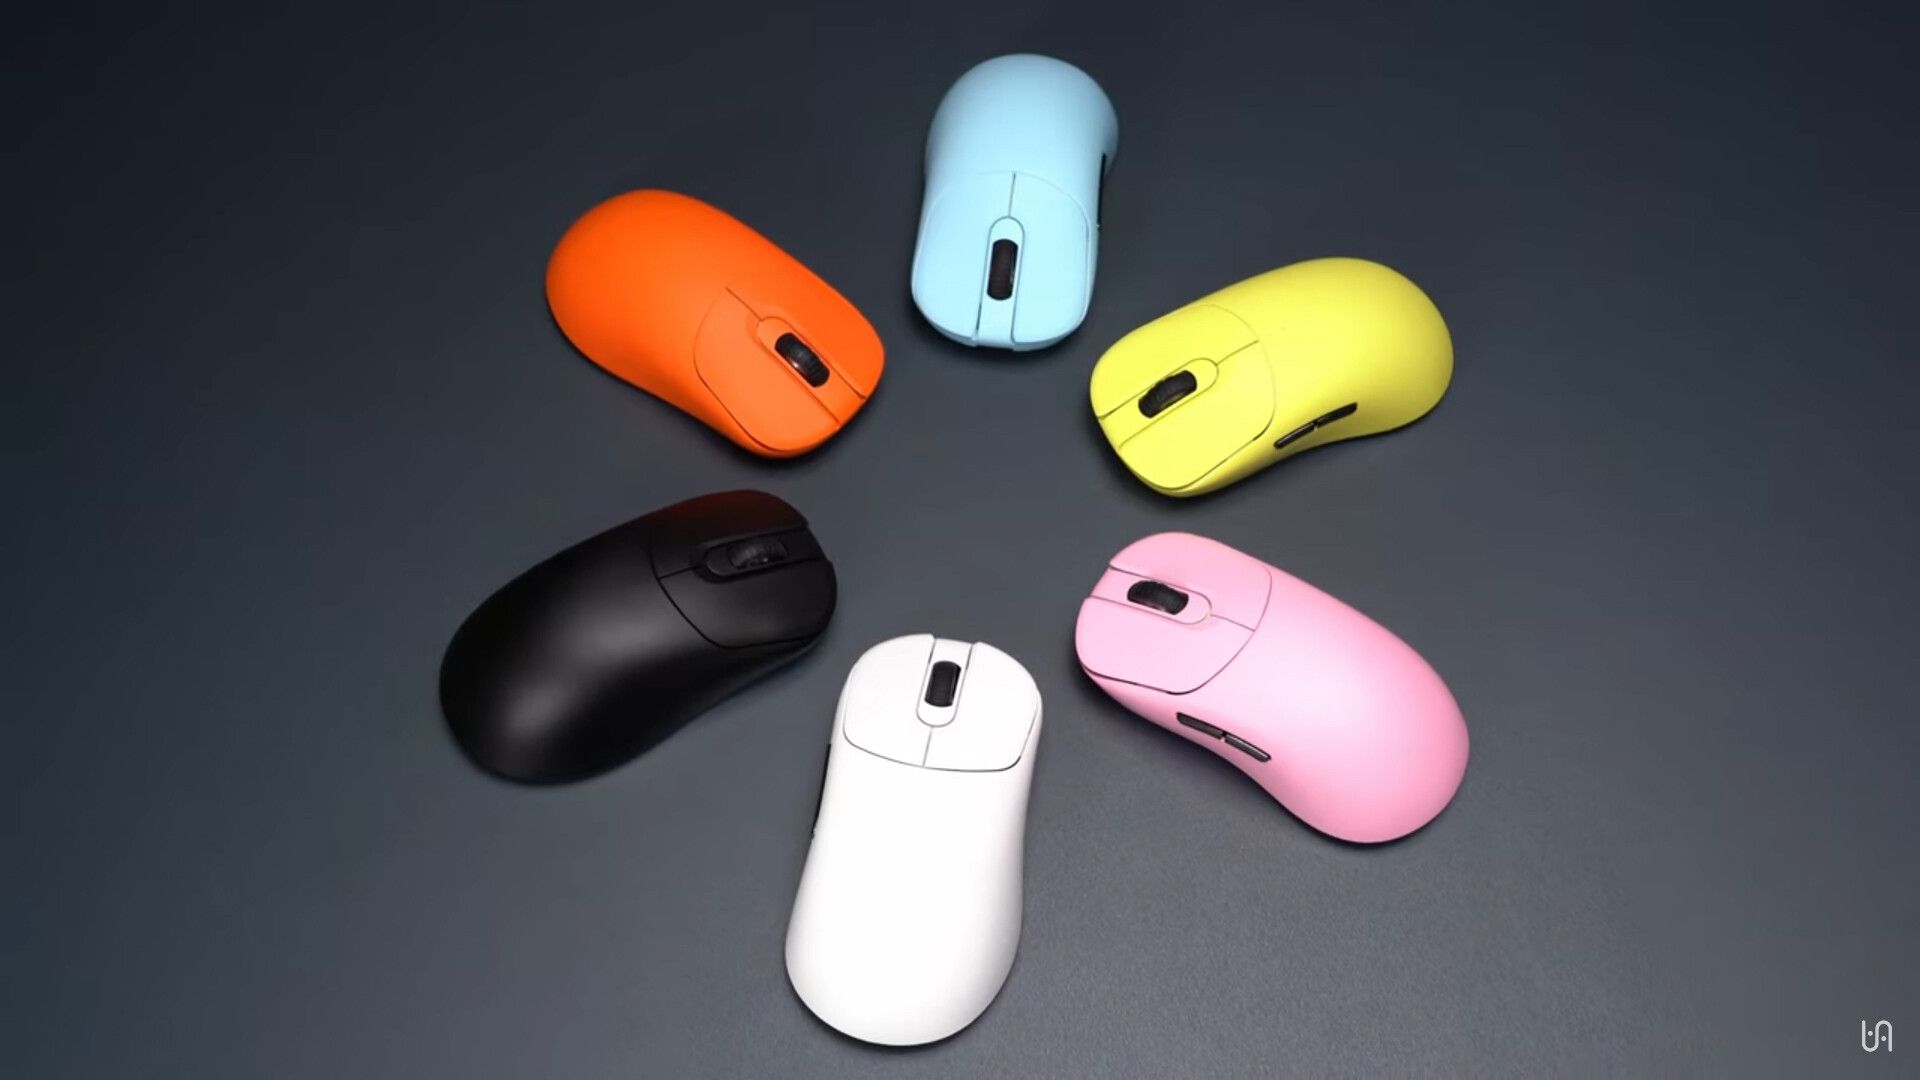 VAXEE Reveals The Colourful ZYGEN NP-01S Wireless Gaming Mouse | eTeknix